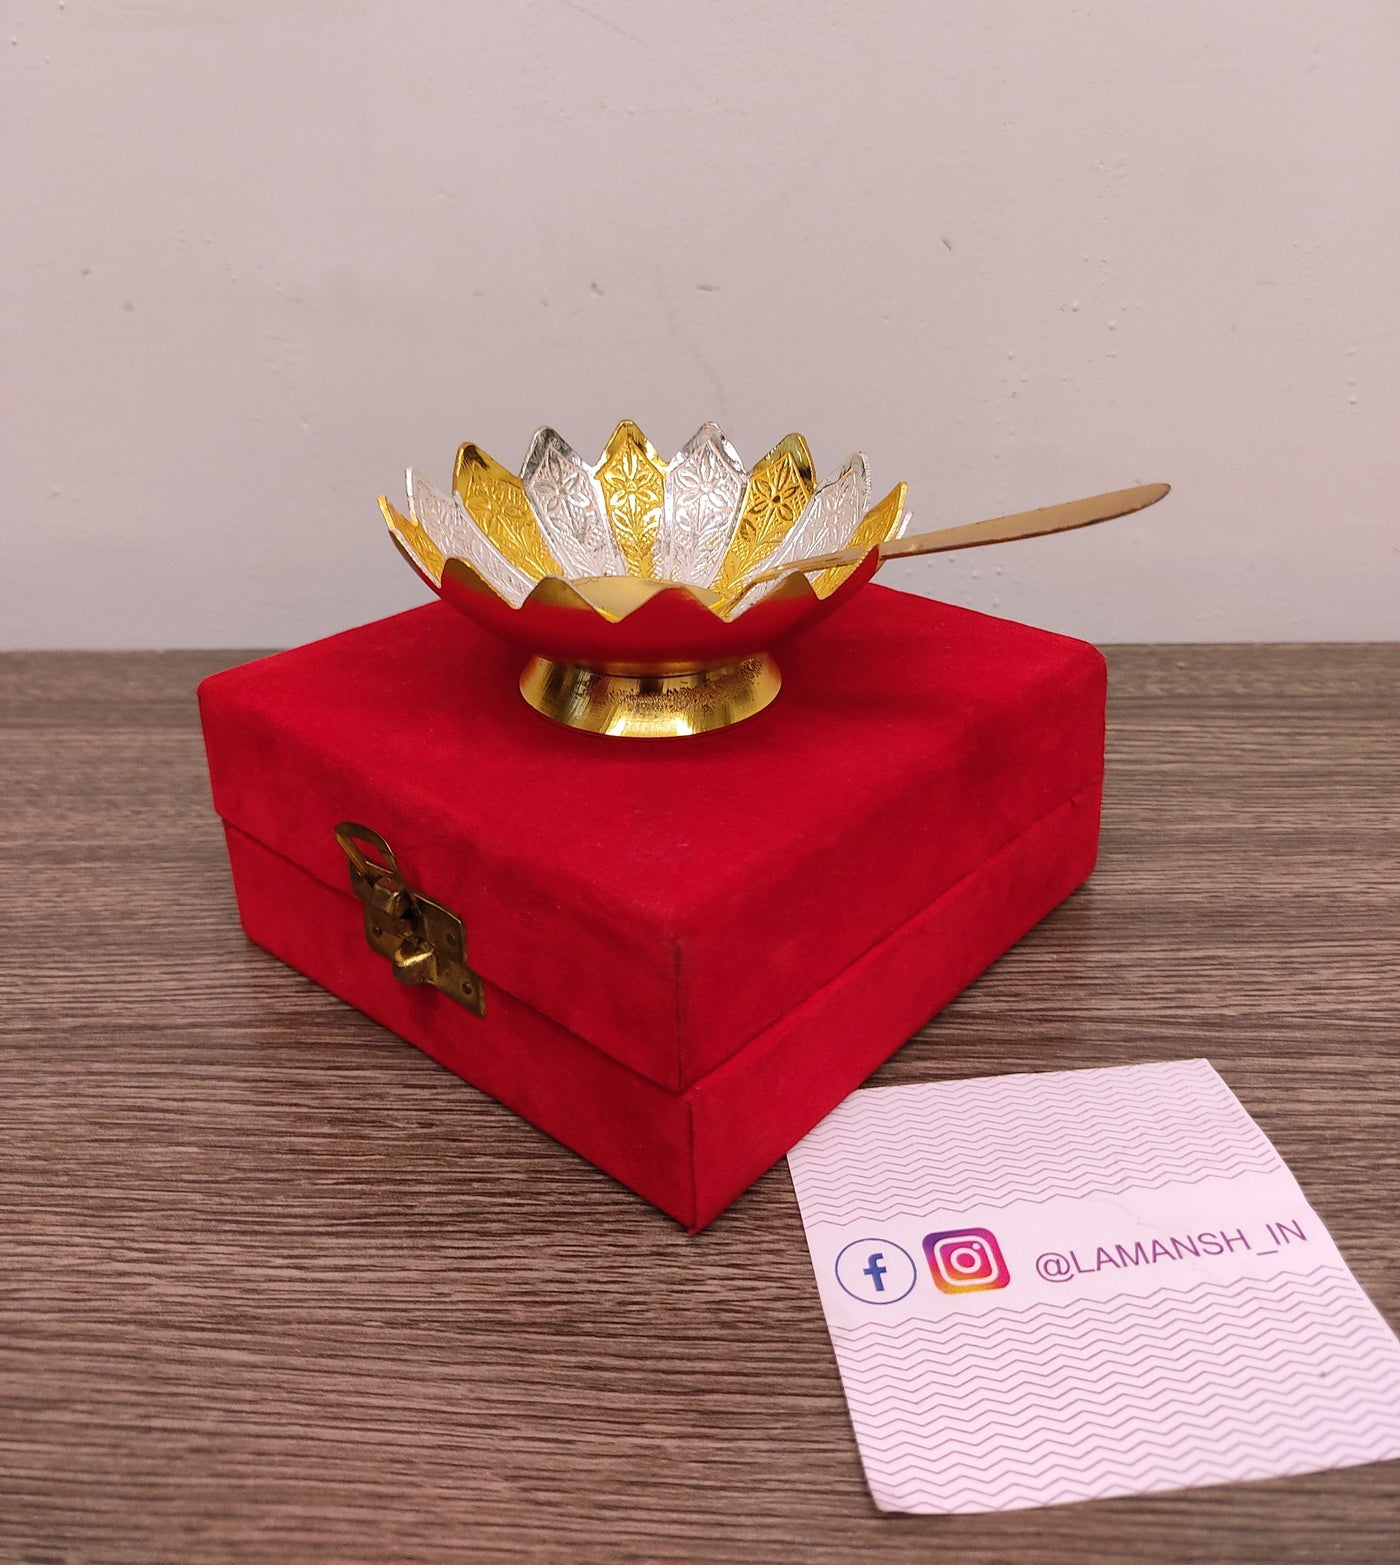 280 Rs per set🏷on ordering in bulk | Call 📞 at 8619550223 Sliver Bowl set LAMANSH® Silver Golden Plated Bowl set for Return Gifting 🎁 in Wedding ceremony (260 grams each box)